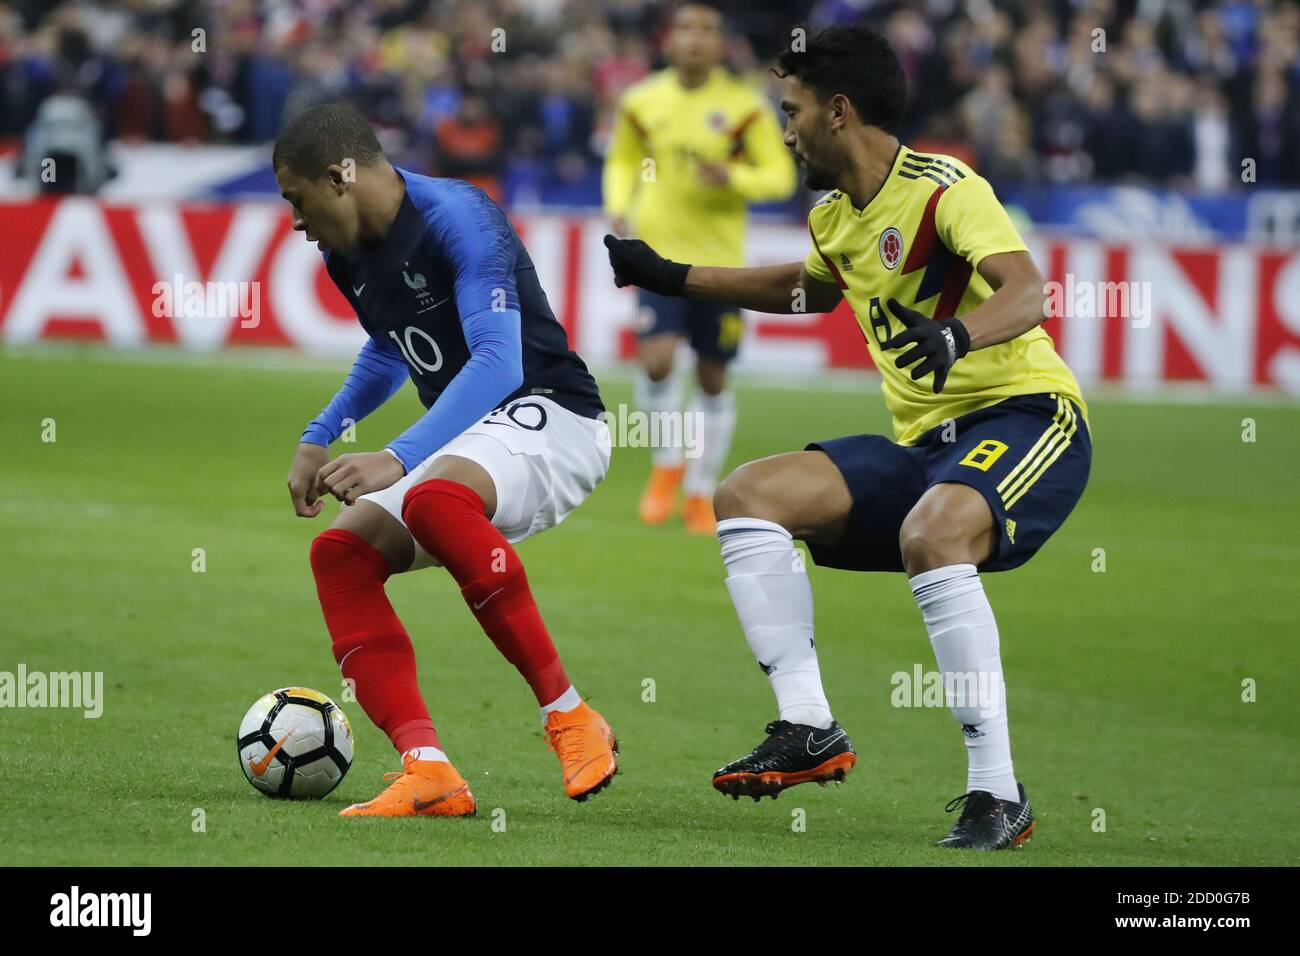 France's Kylian Mbappe battling Colombia's Abel Aguilar during France v Colombia friendly football match at the Stade de France stadium in Saint-Denis, suburb of Paris, France on March 23, 2018. Colombia won 3-2. Photo by Henri Szwarc/ABACAPRESS.COM Stock Photo